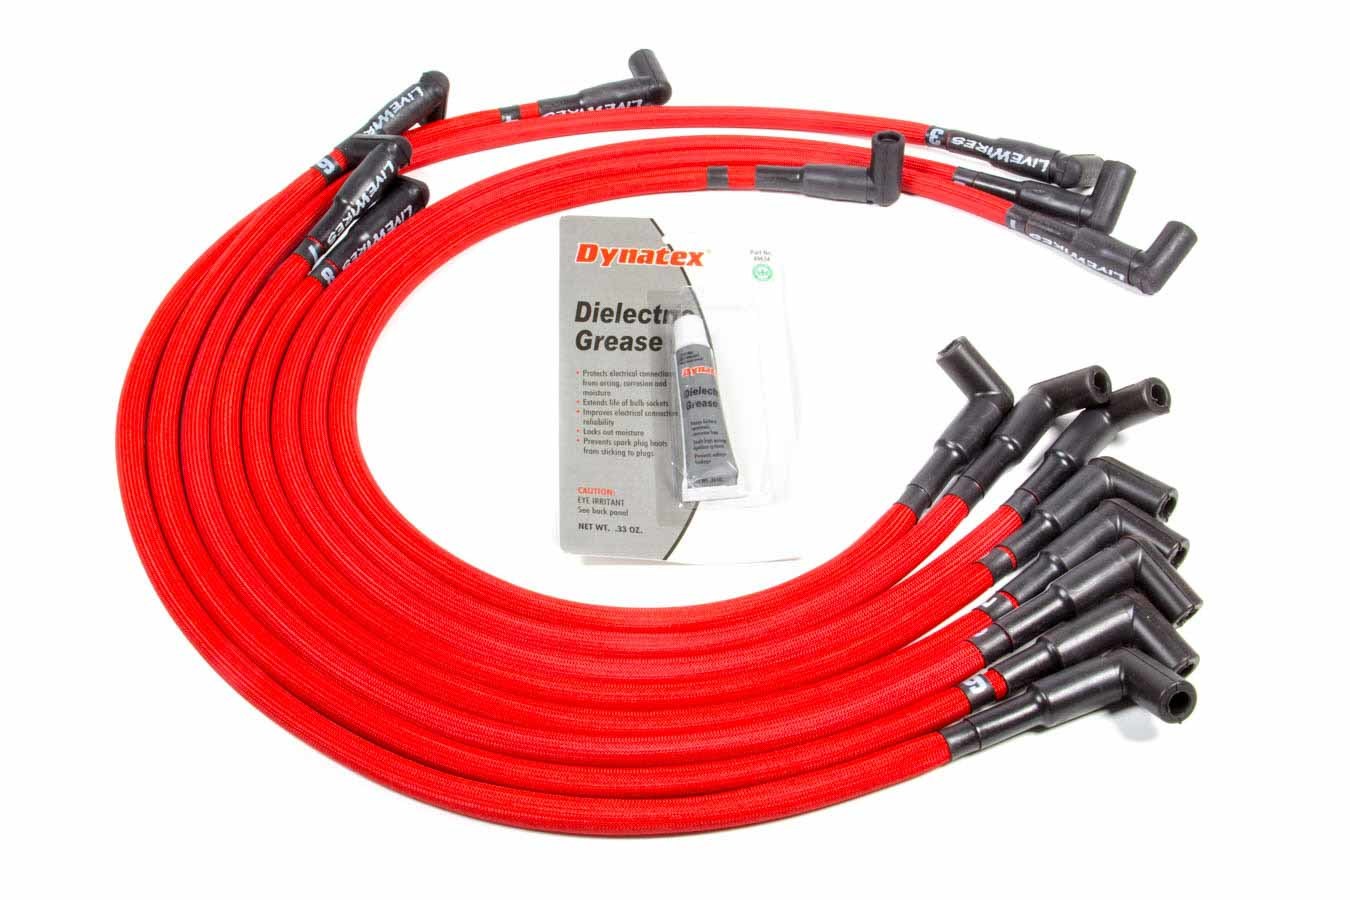 Performance Distributors C9051RD Spark Plug Wire Set, Livewires, Spiral Core, 10 mm, Red, 90 Degree Plug Boots, HEI Style Terminal, GM V8, Kit